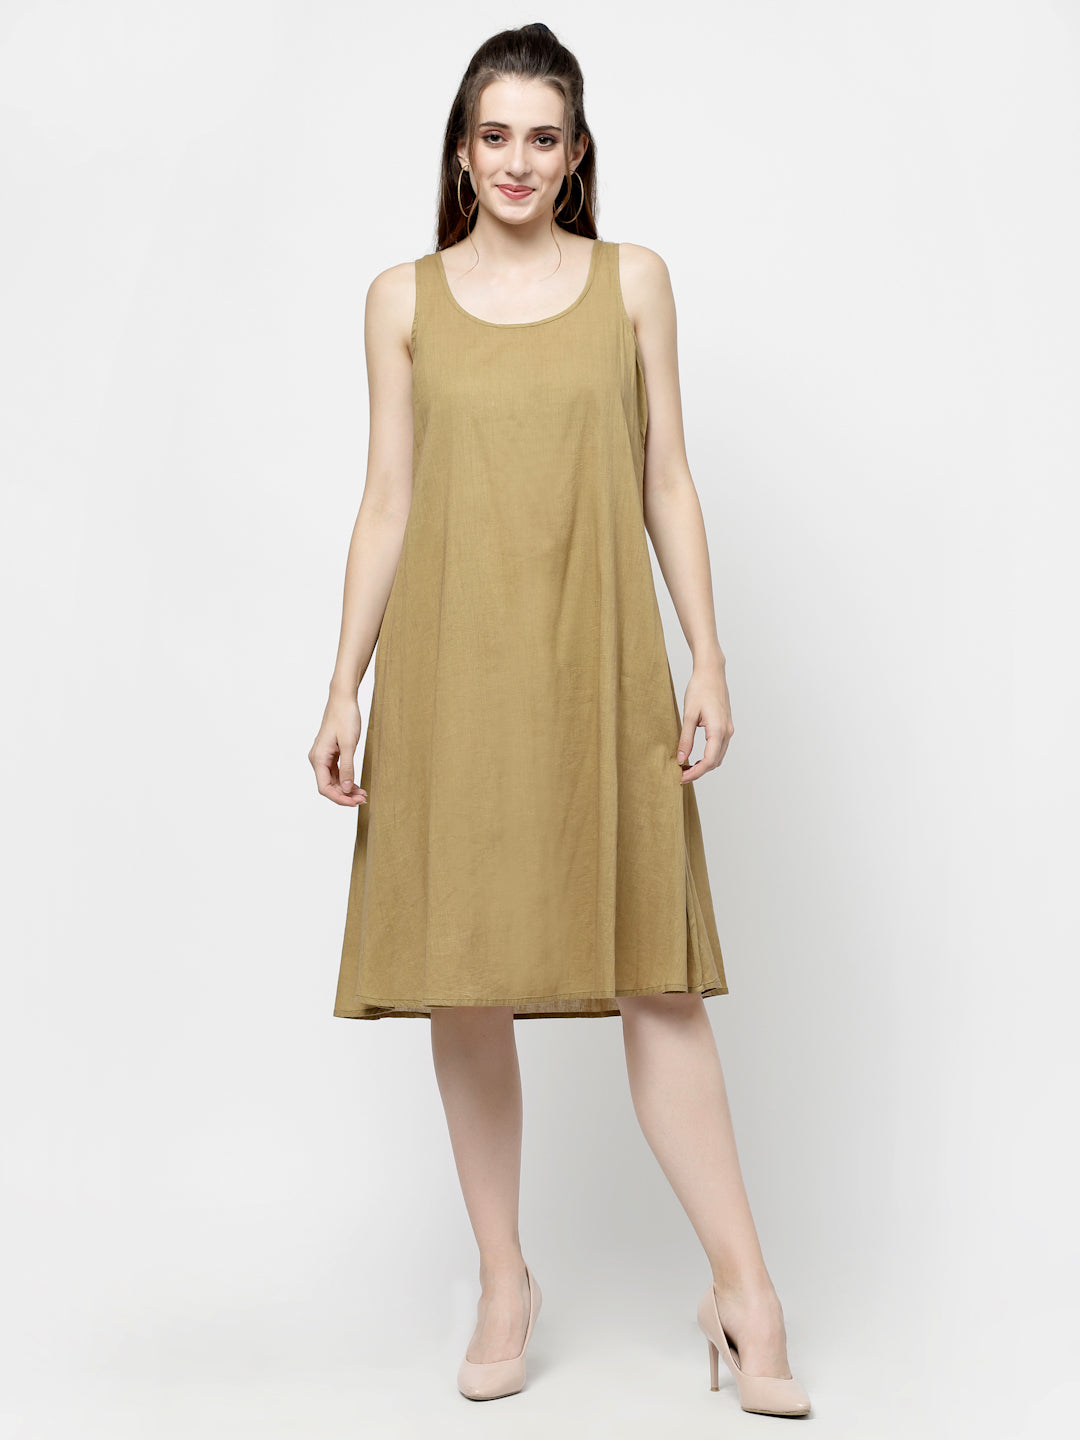 Terquois Beige Woven A-line Dress with Ruffle detail and has a Round-neck Dresses TERQUOIS   